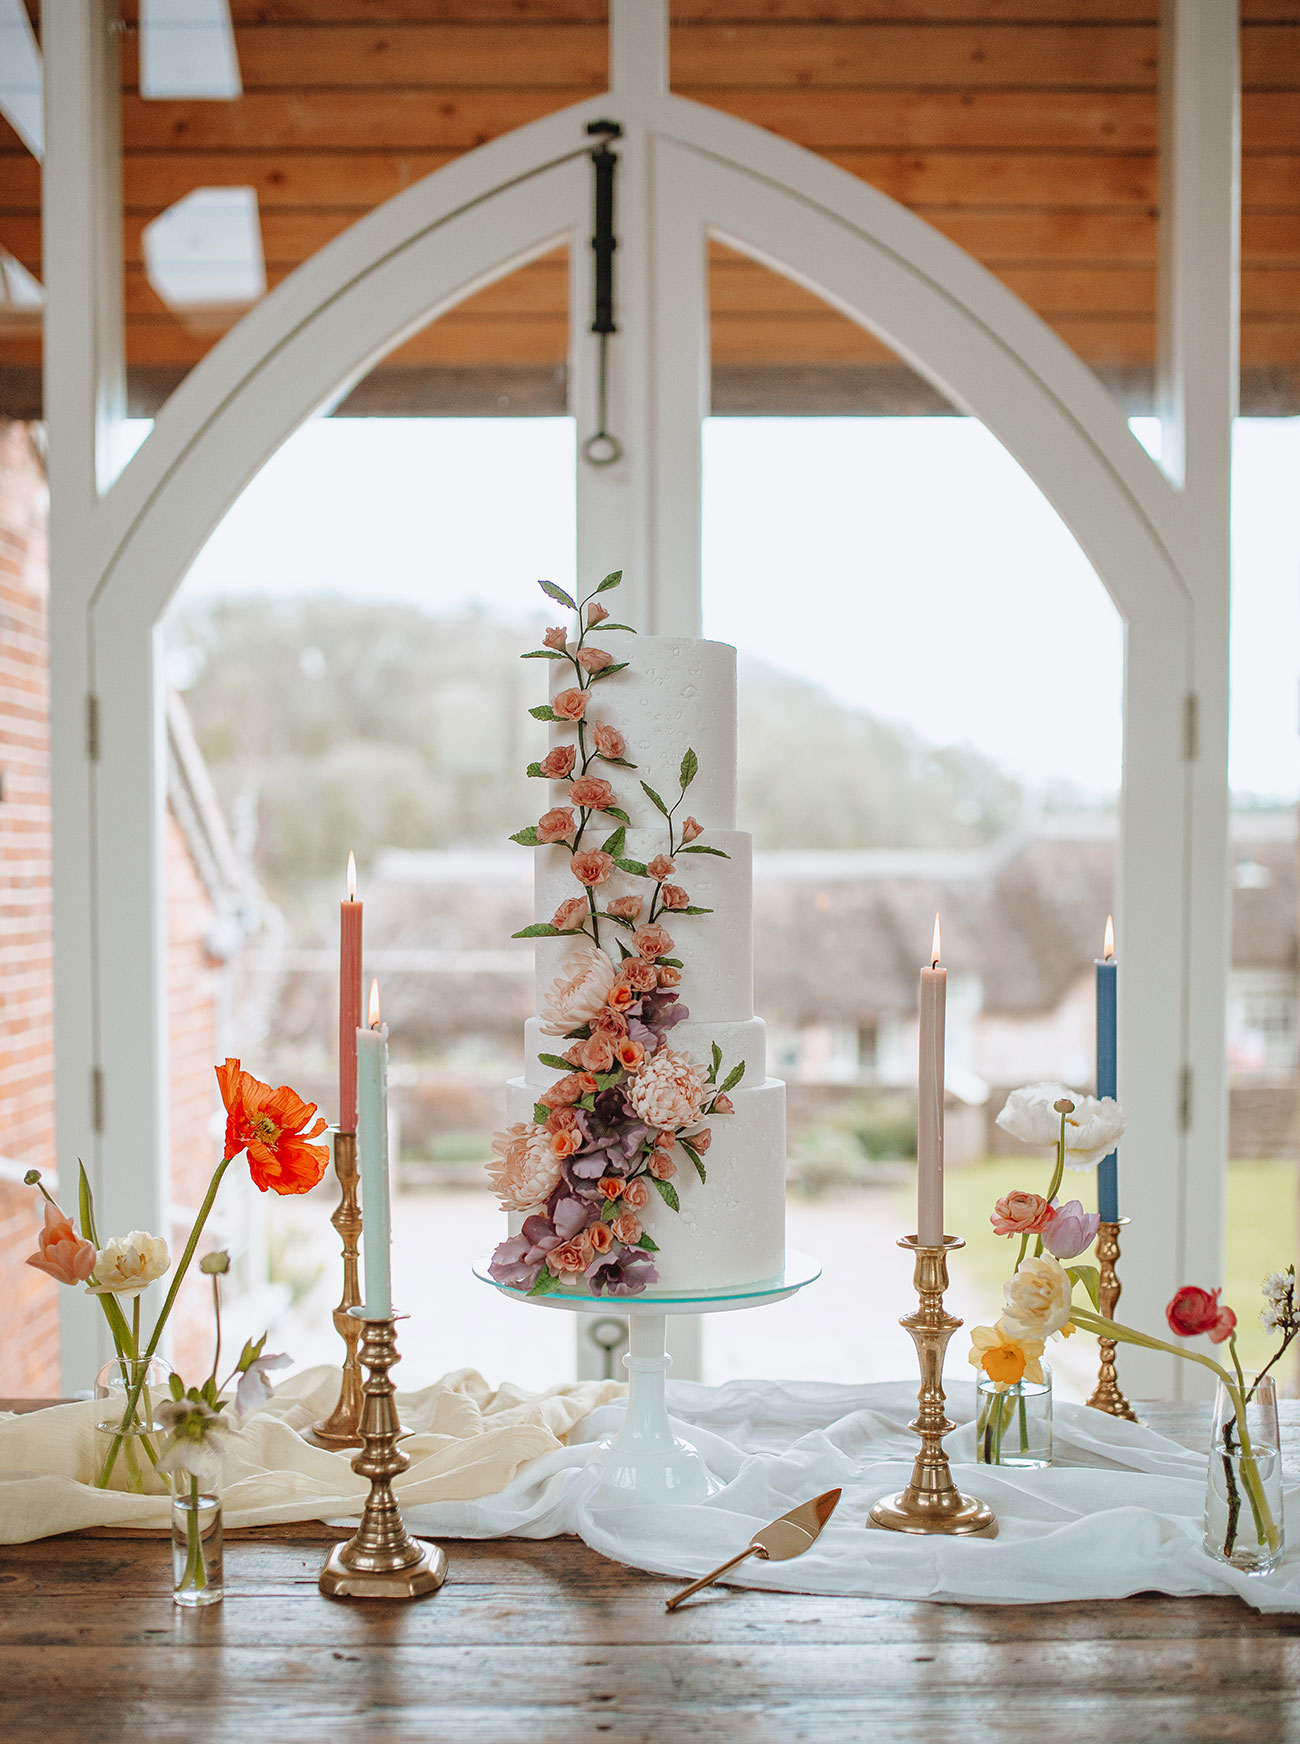 Wedding Styled Shoot Rustic Natural Florals Barn11